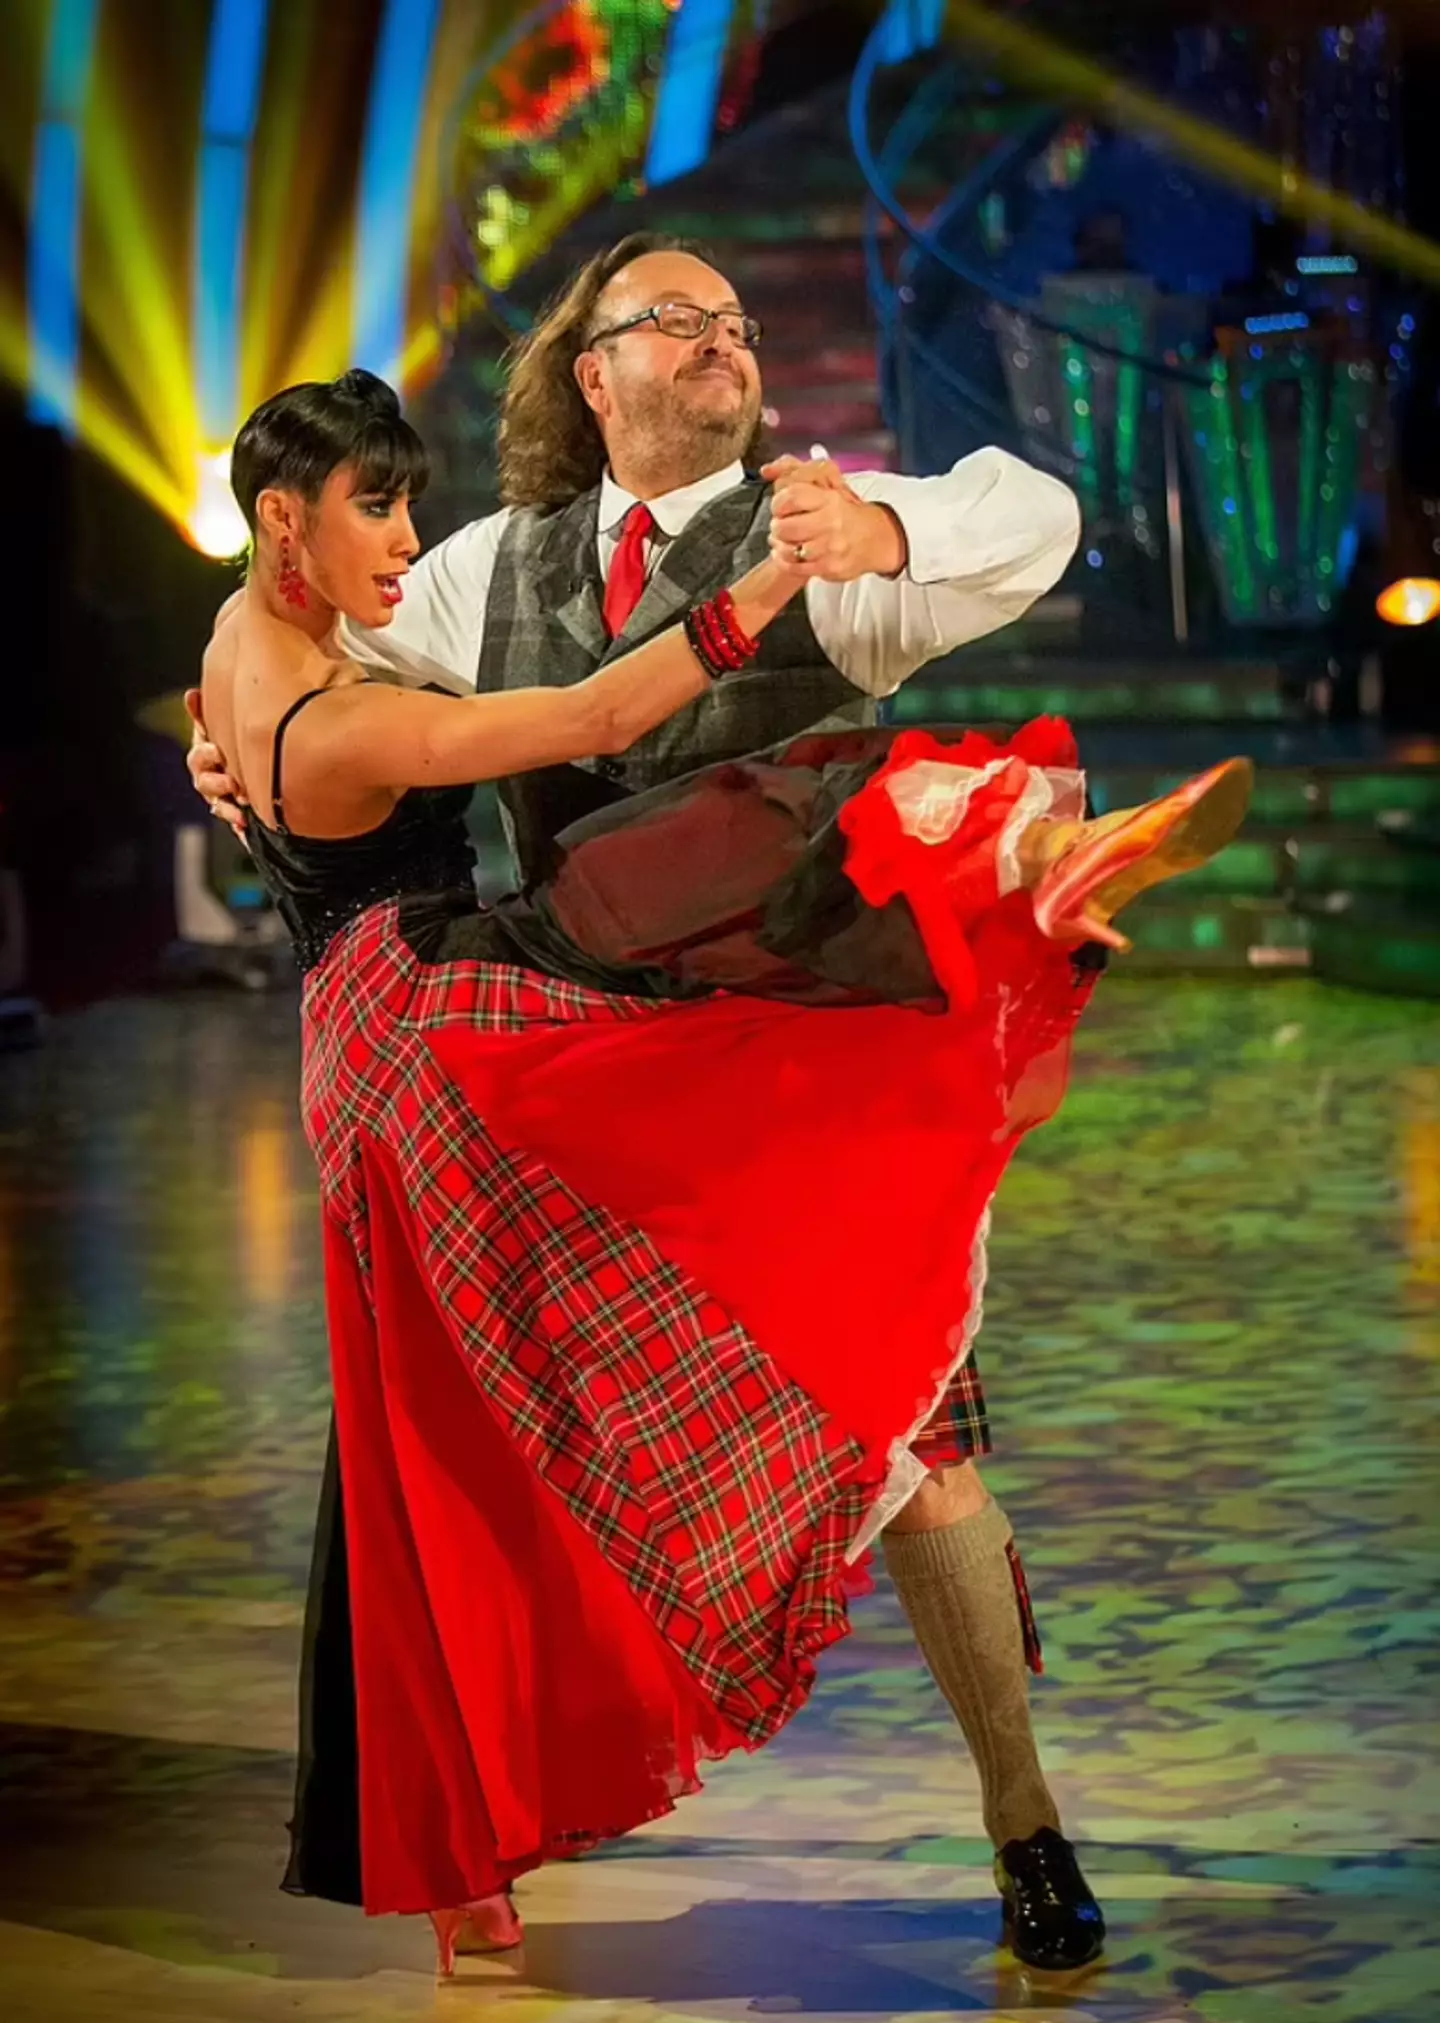 Dave's Strictly partner Karen has paid tribute.